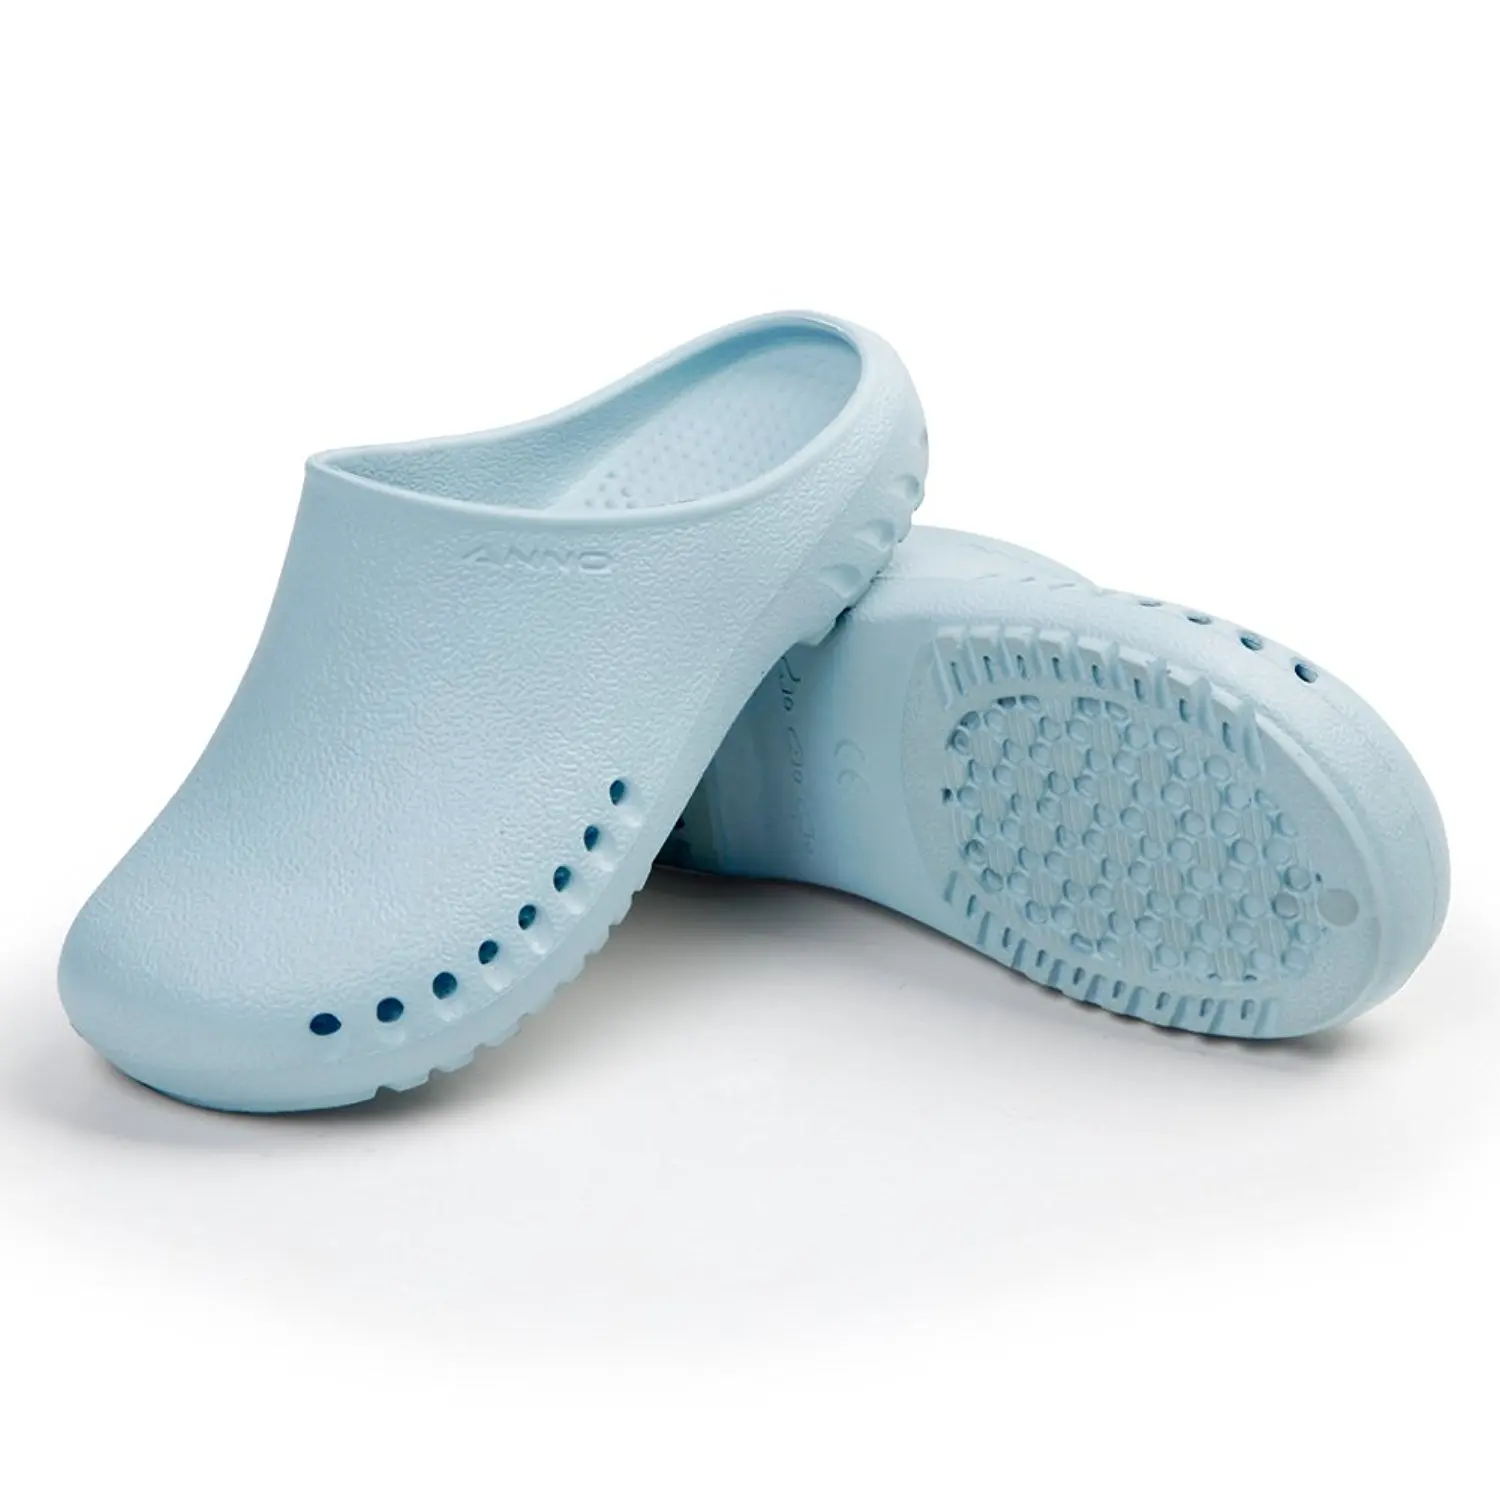 Cheap Hospital Shoes, find Hospital Shoes deals on line at Alibaba.com